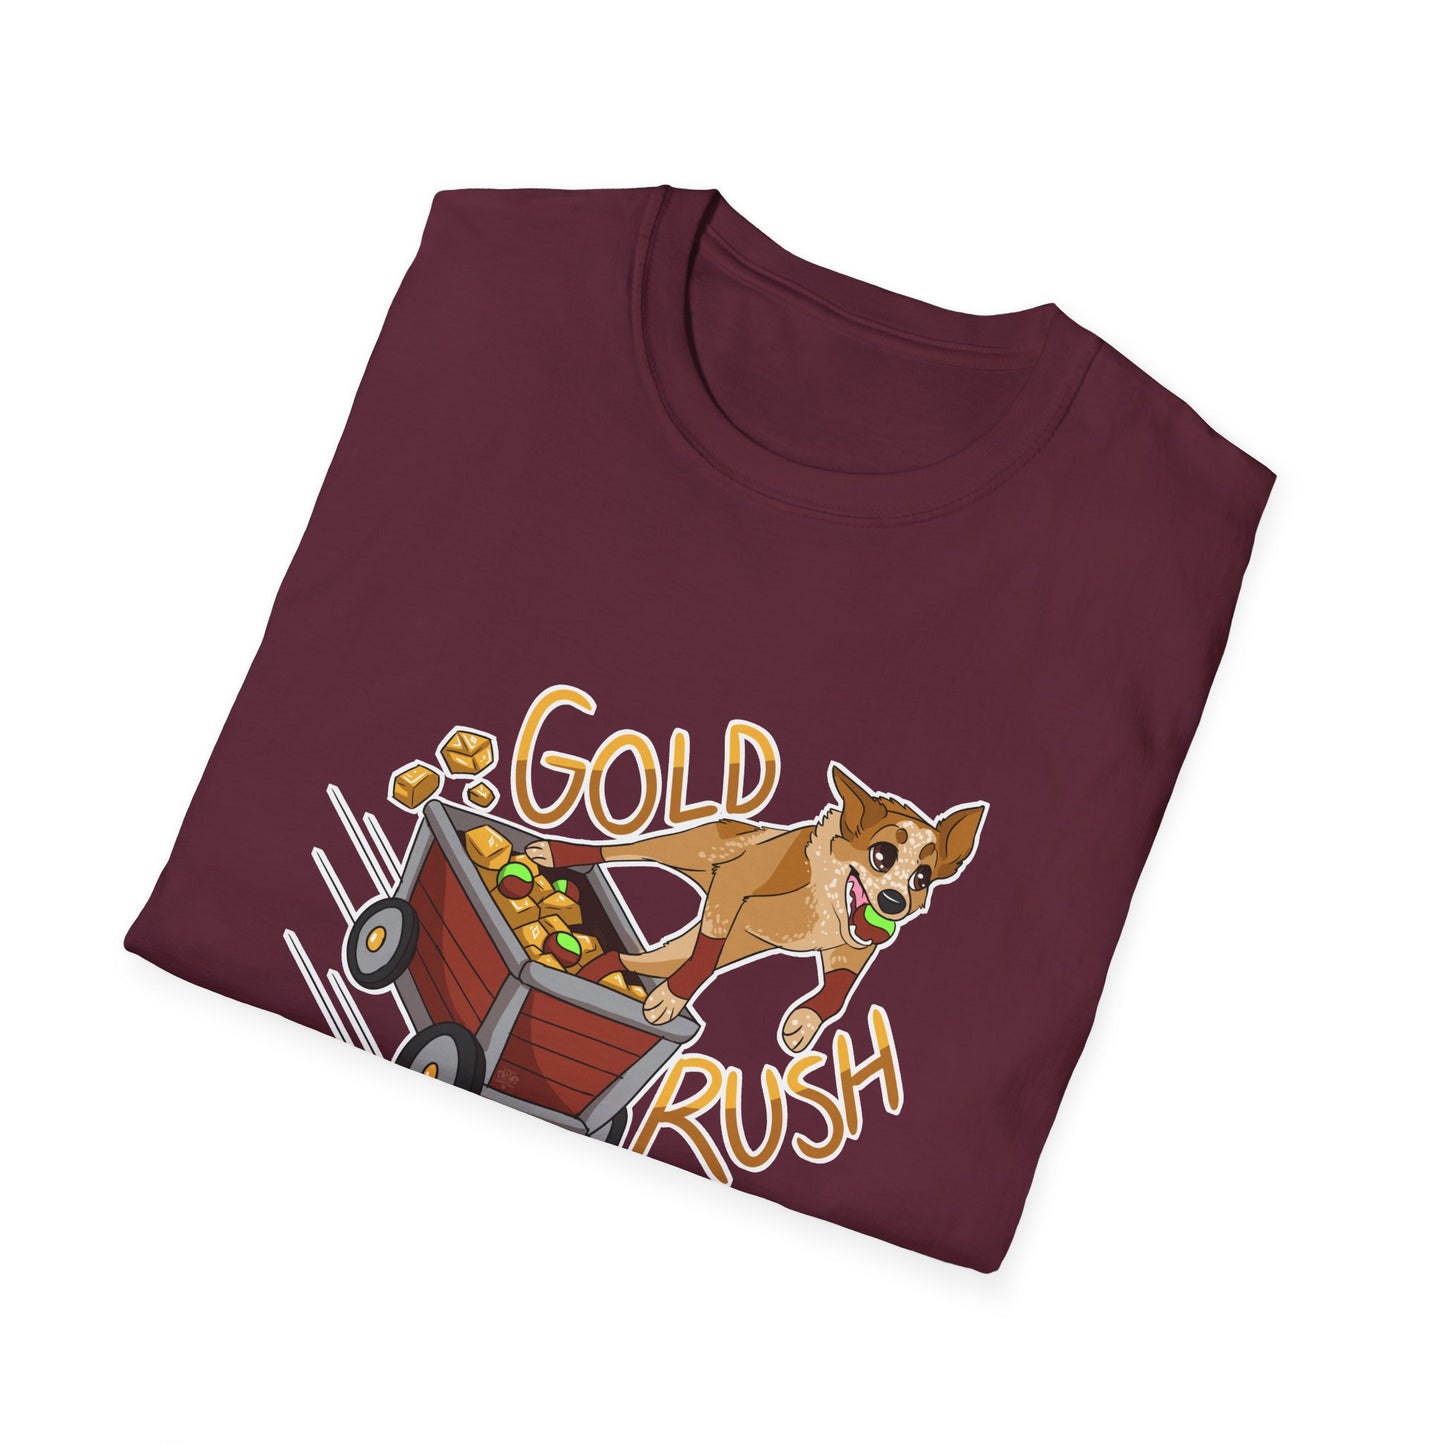 2 GOLD RUSH FLYBALL Unisex Softstyle T-Shirt